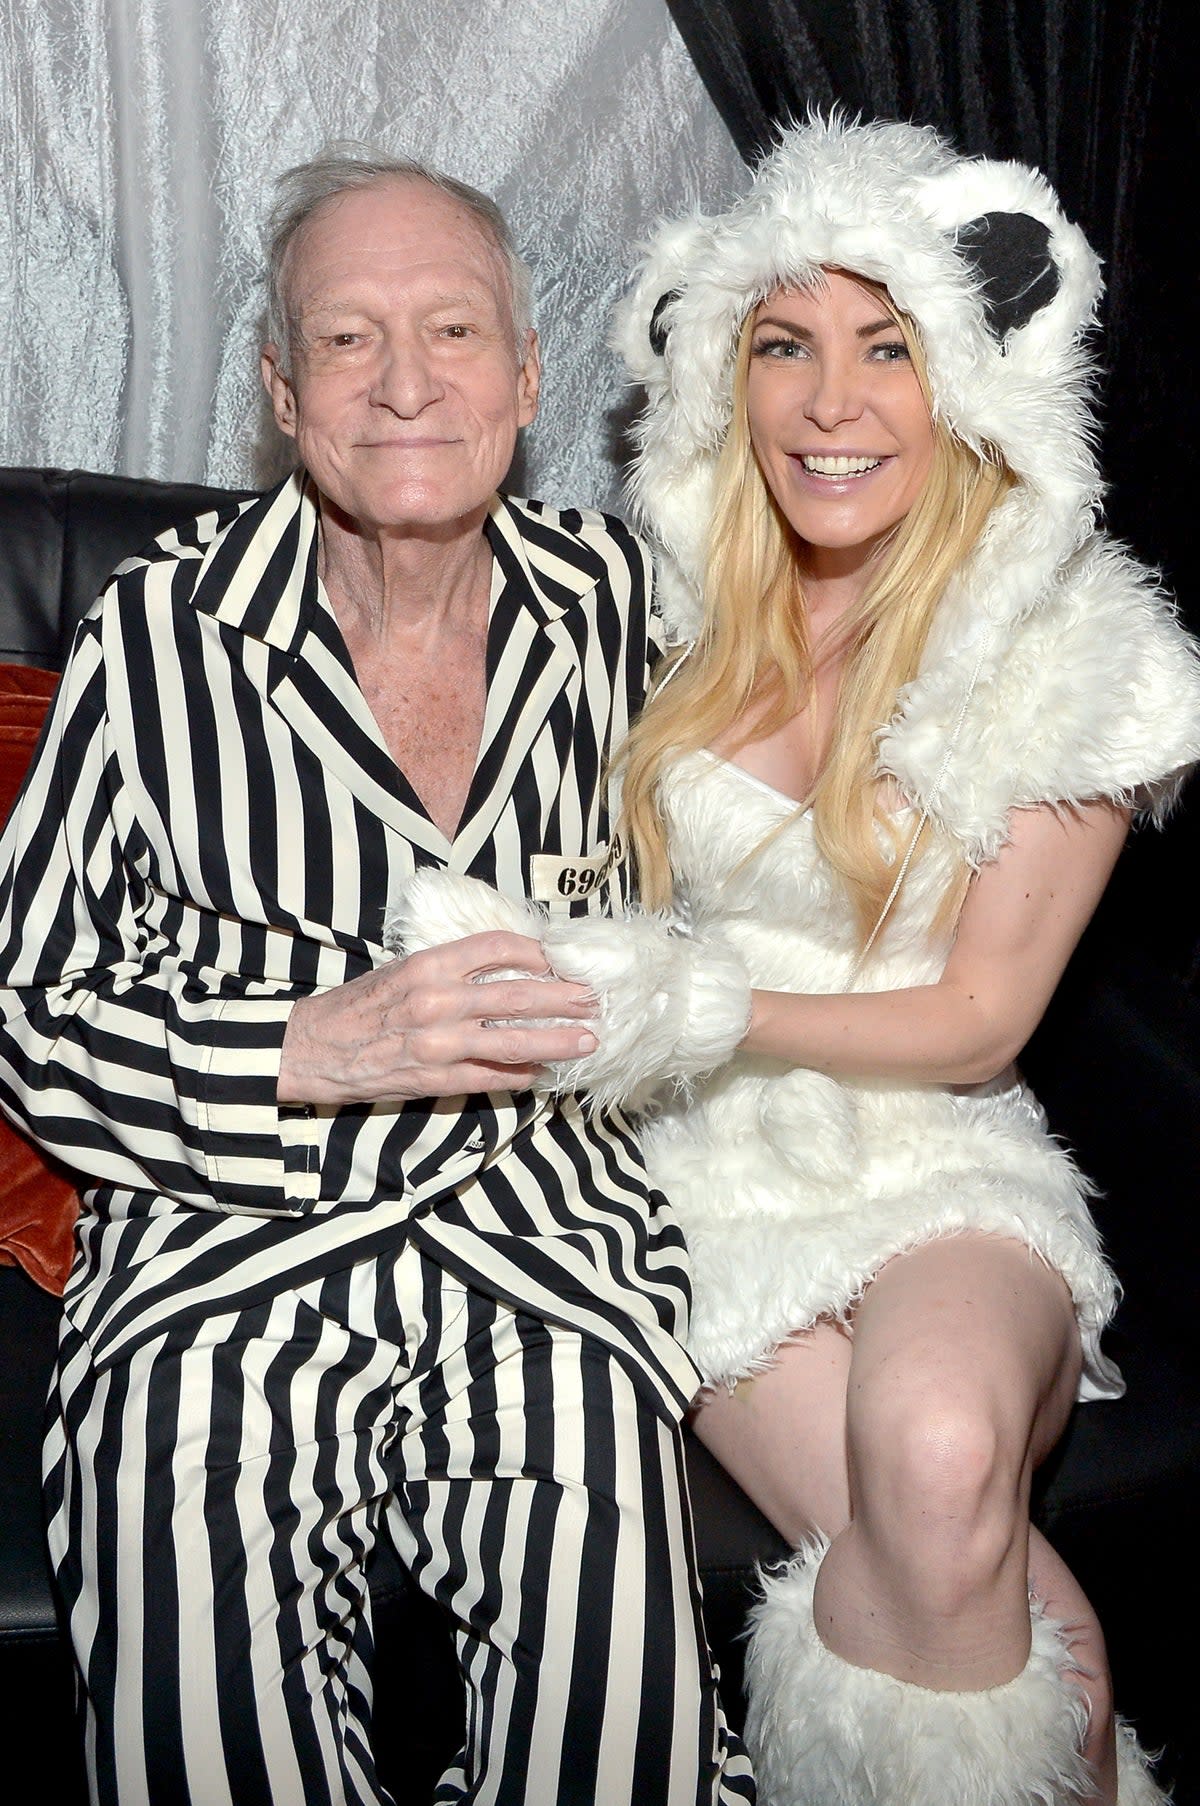 Hugh Hefner (L) and model Crystal Hefner attend the annual Halloween Party, hosted by Playboy and Hugh Hefner, at the Playboy Mansion on October 24, 2015 (Getty)